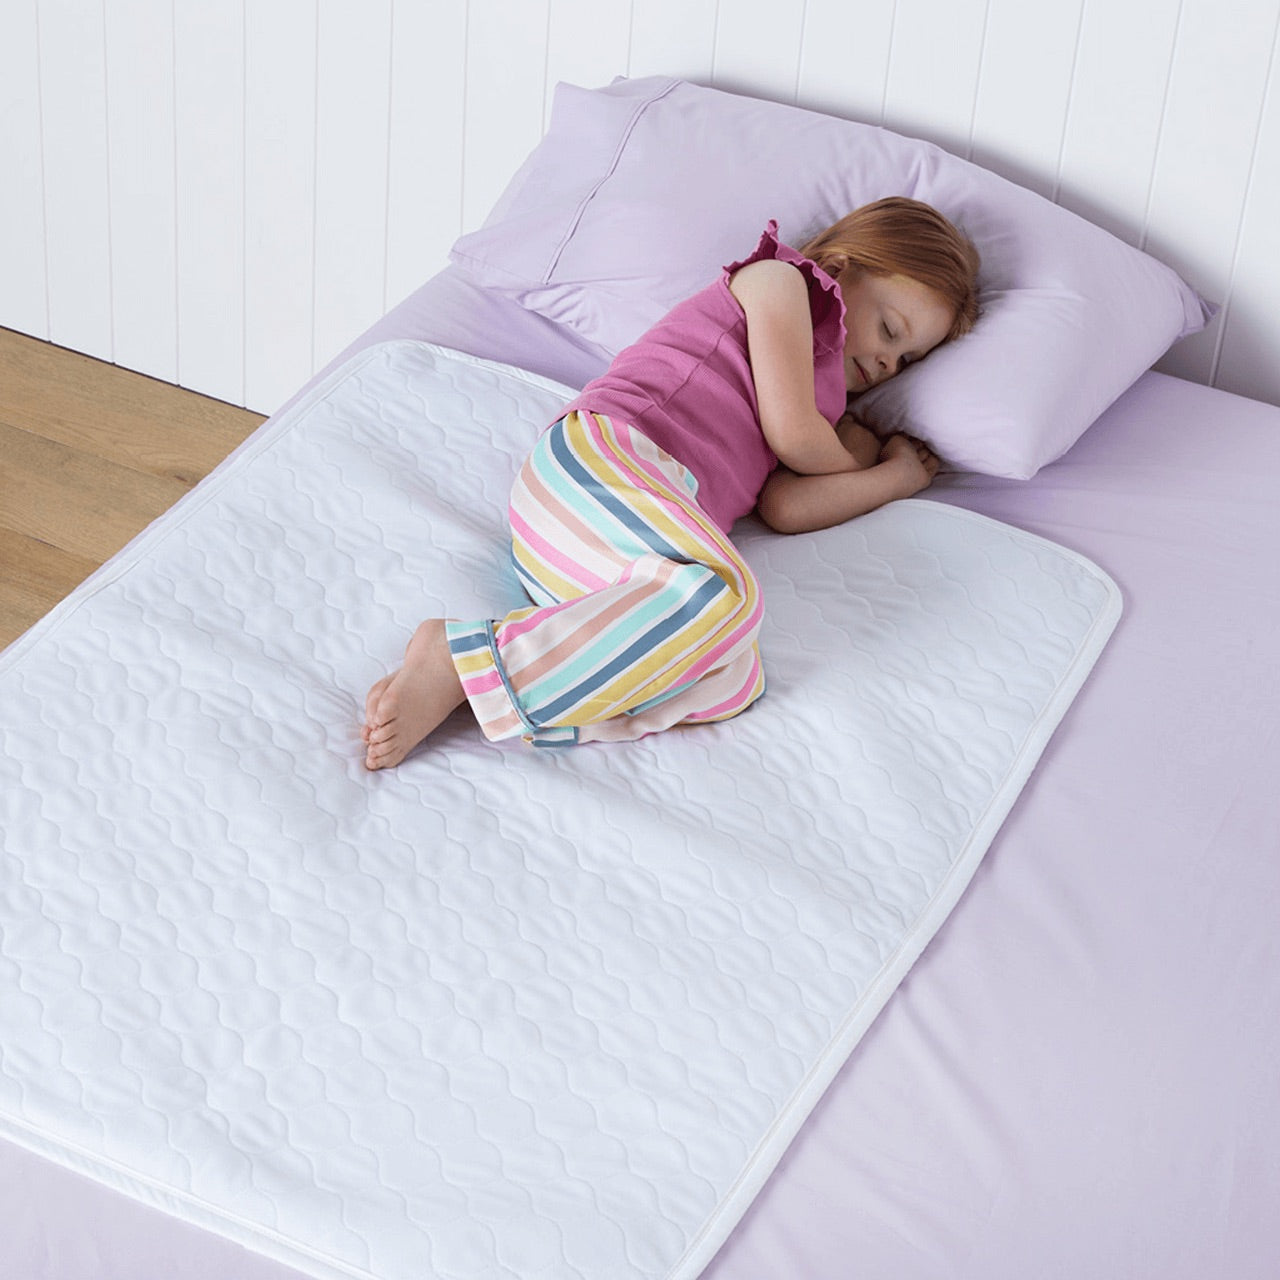 Child sleeping on bed with the Sleep Easy Bed Mat